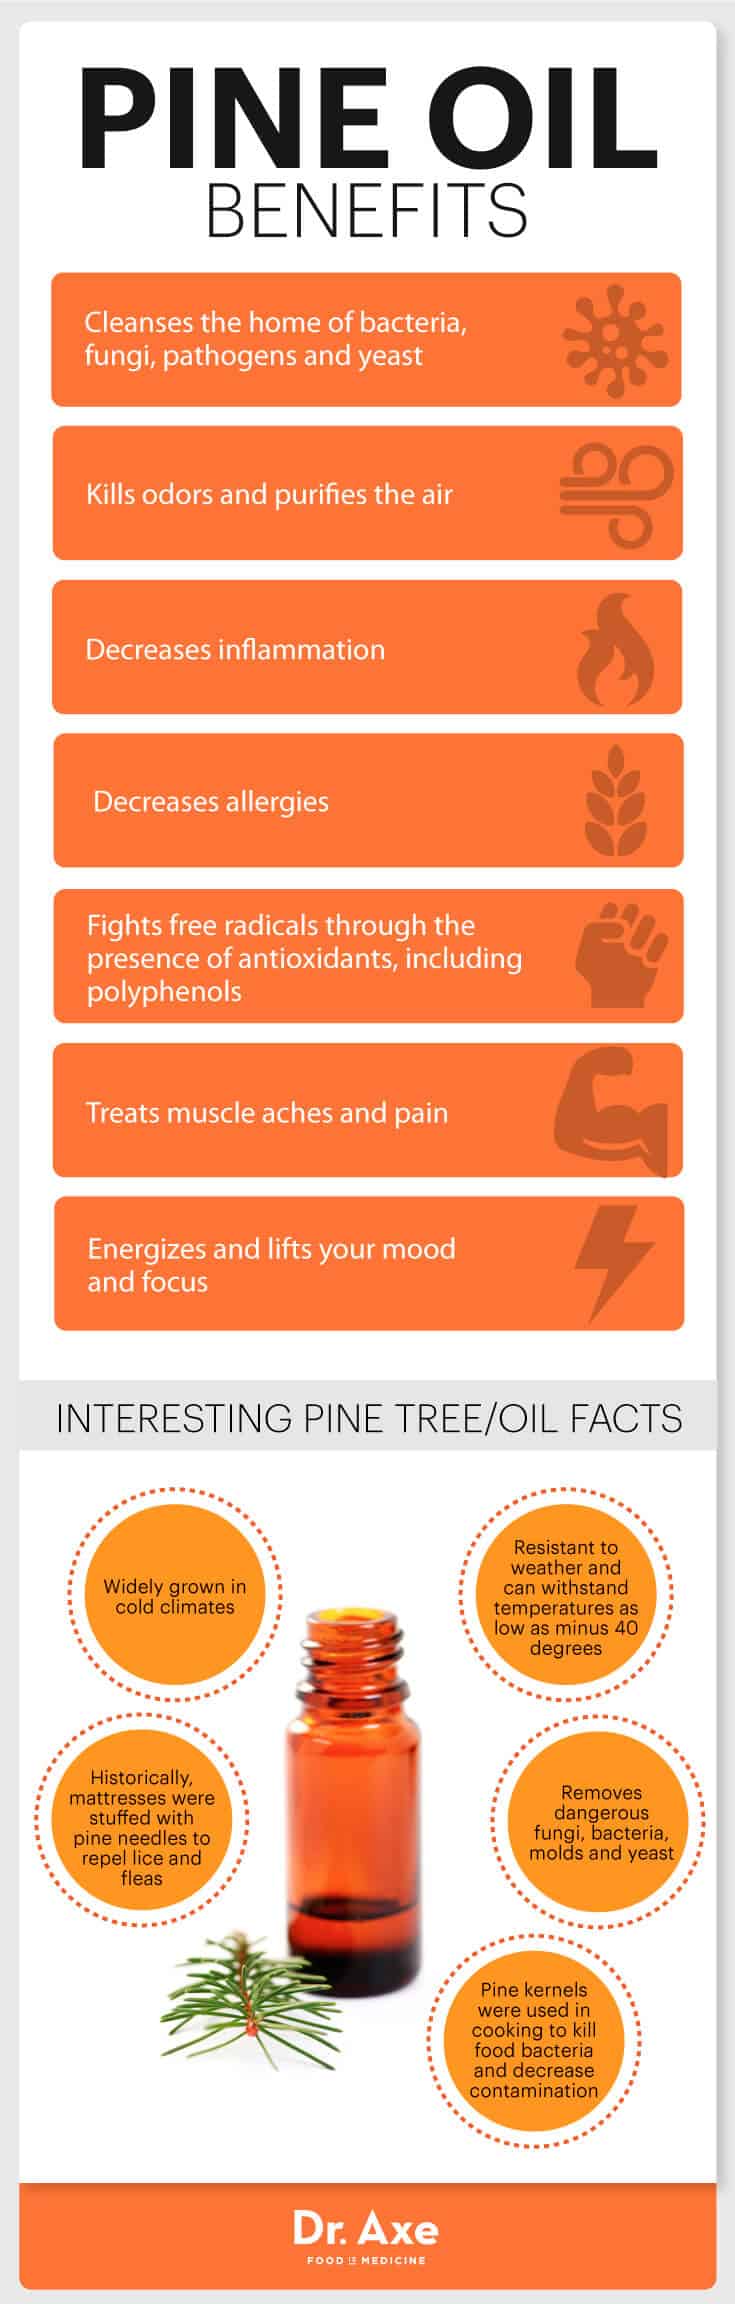 Pine oil uses infographic - Dr. Axe